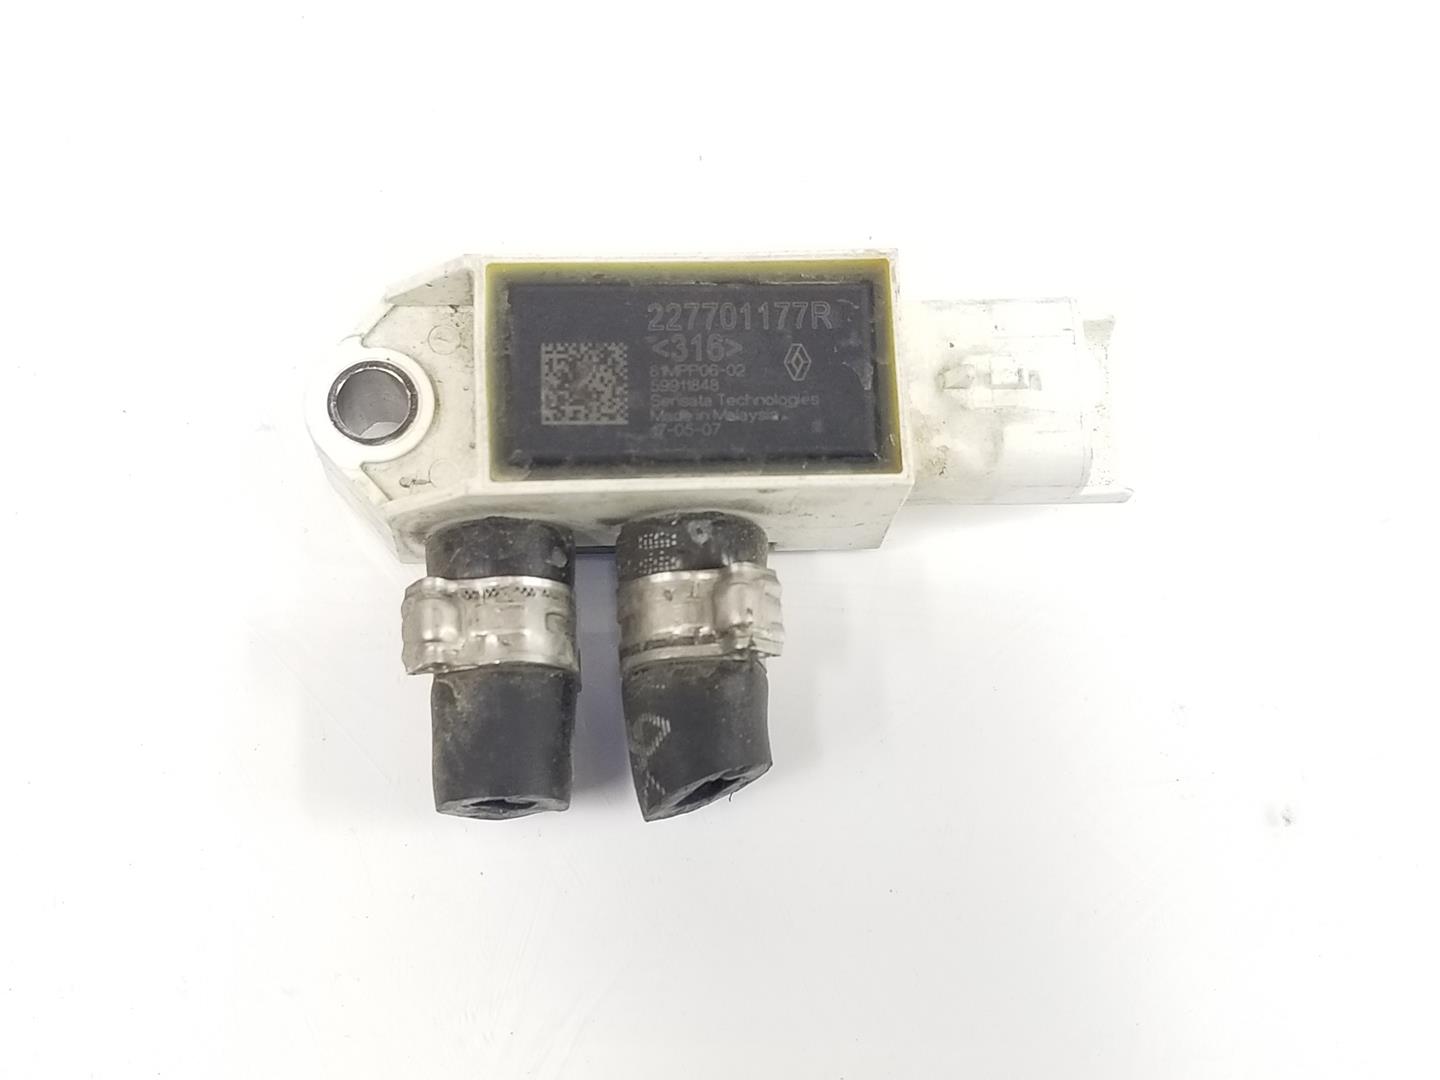 RENAULT 3 generation (2005-2012) Other Control Units 227701177R, 227701177R 19892702